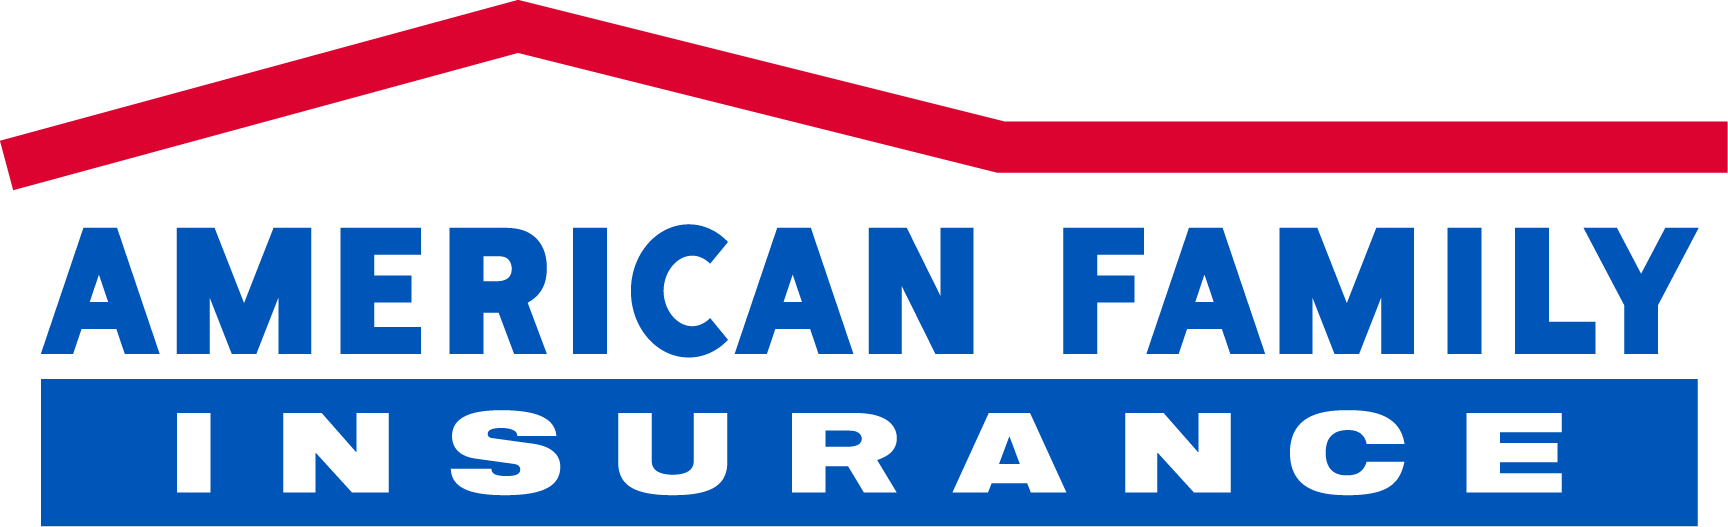 AmFam Roof Logo - American Family Insurance Quotes for Auto, Home, Life and More ...